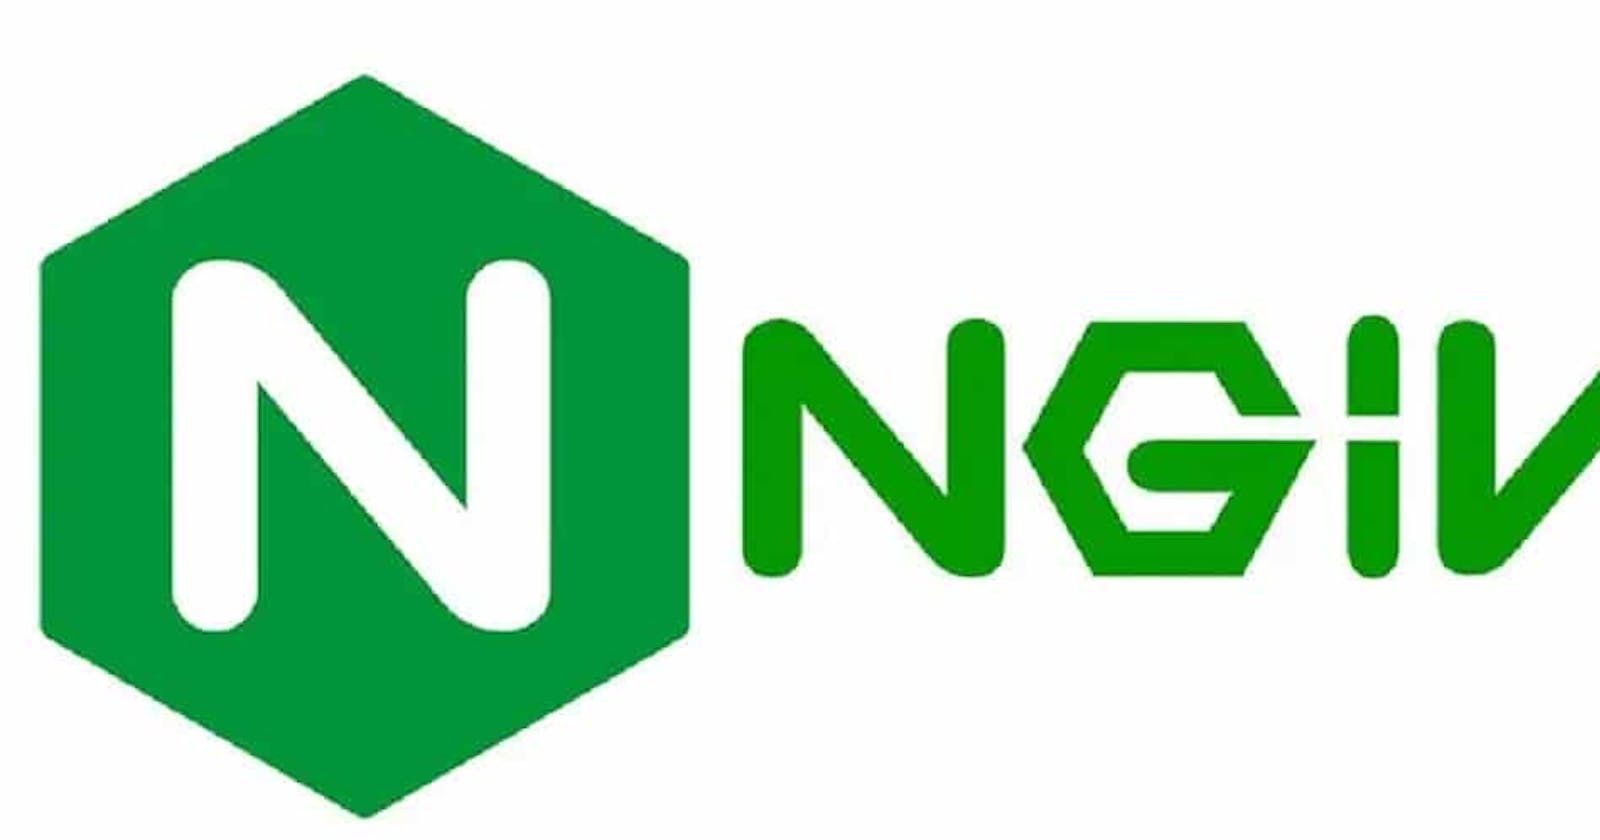 NGINX: The Web Server of Choice for the Next Generation